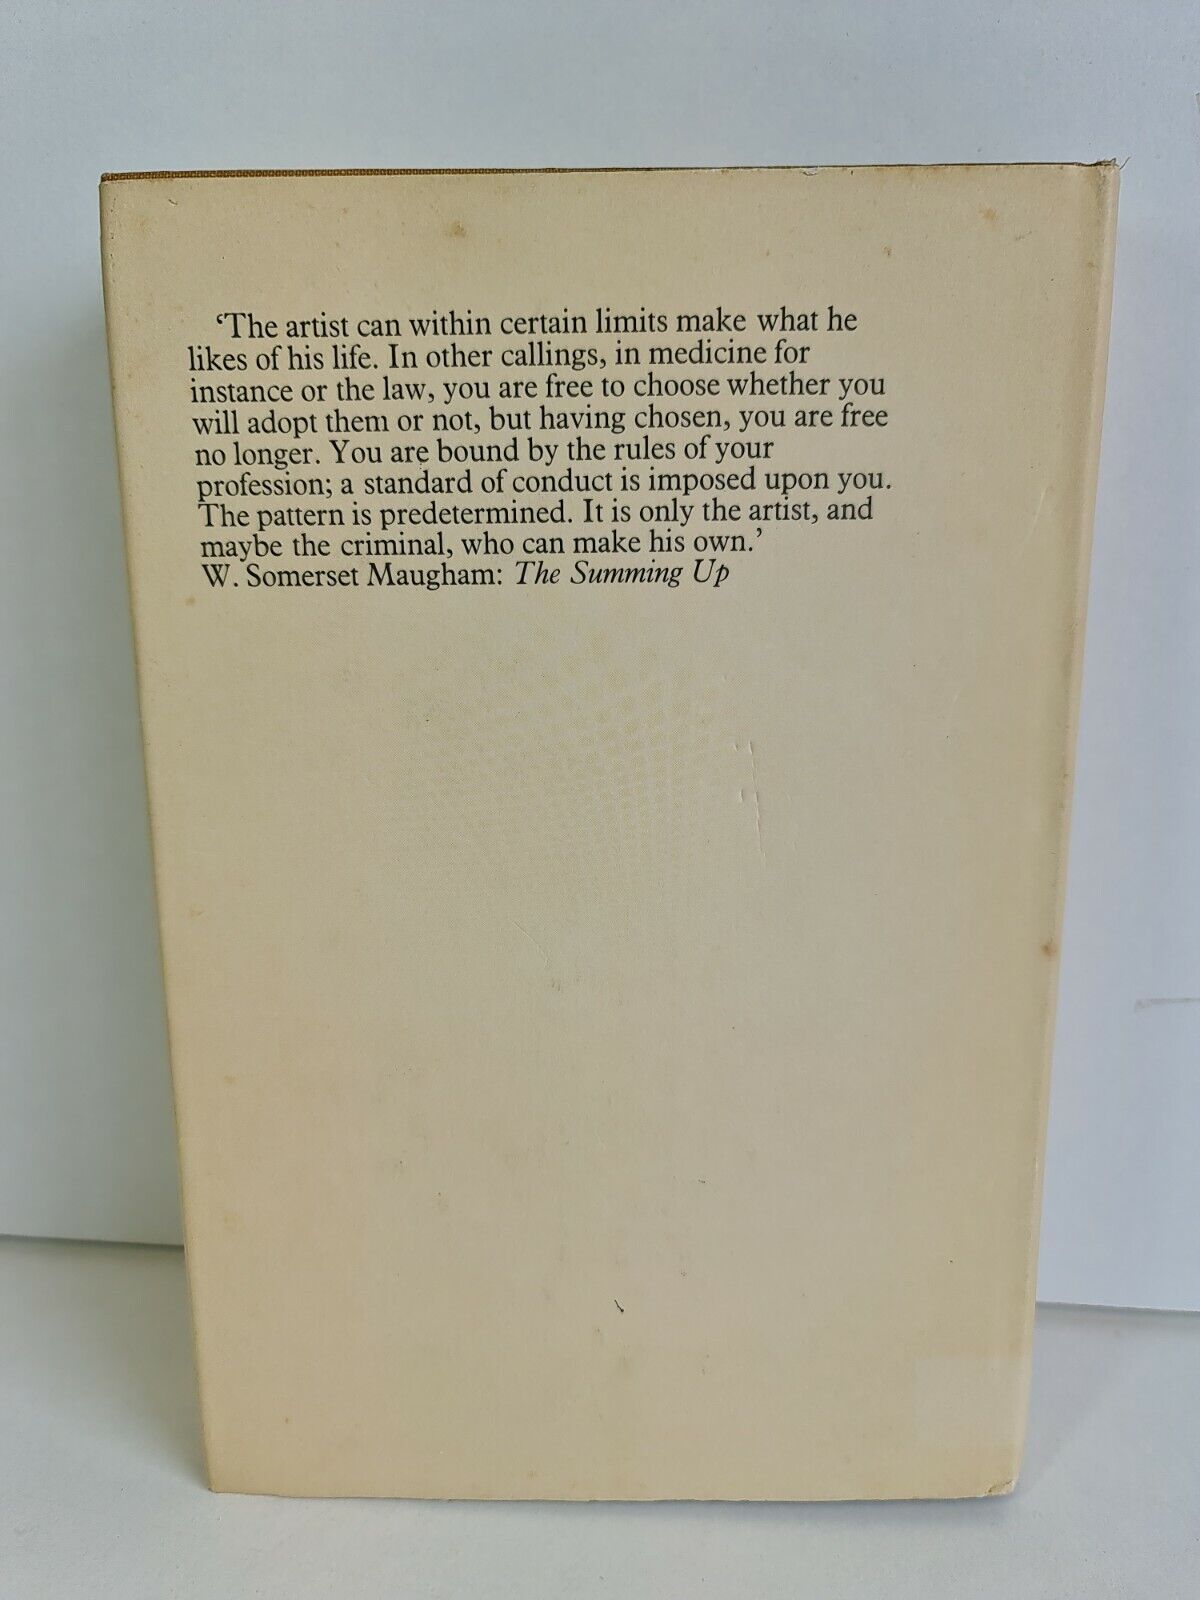 W.Somerset Maugham and the Quest for Freedom by Robert Lorin Calder (1972)